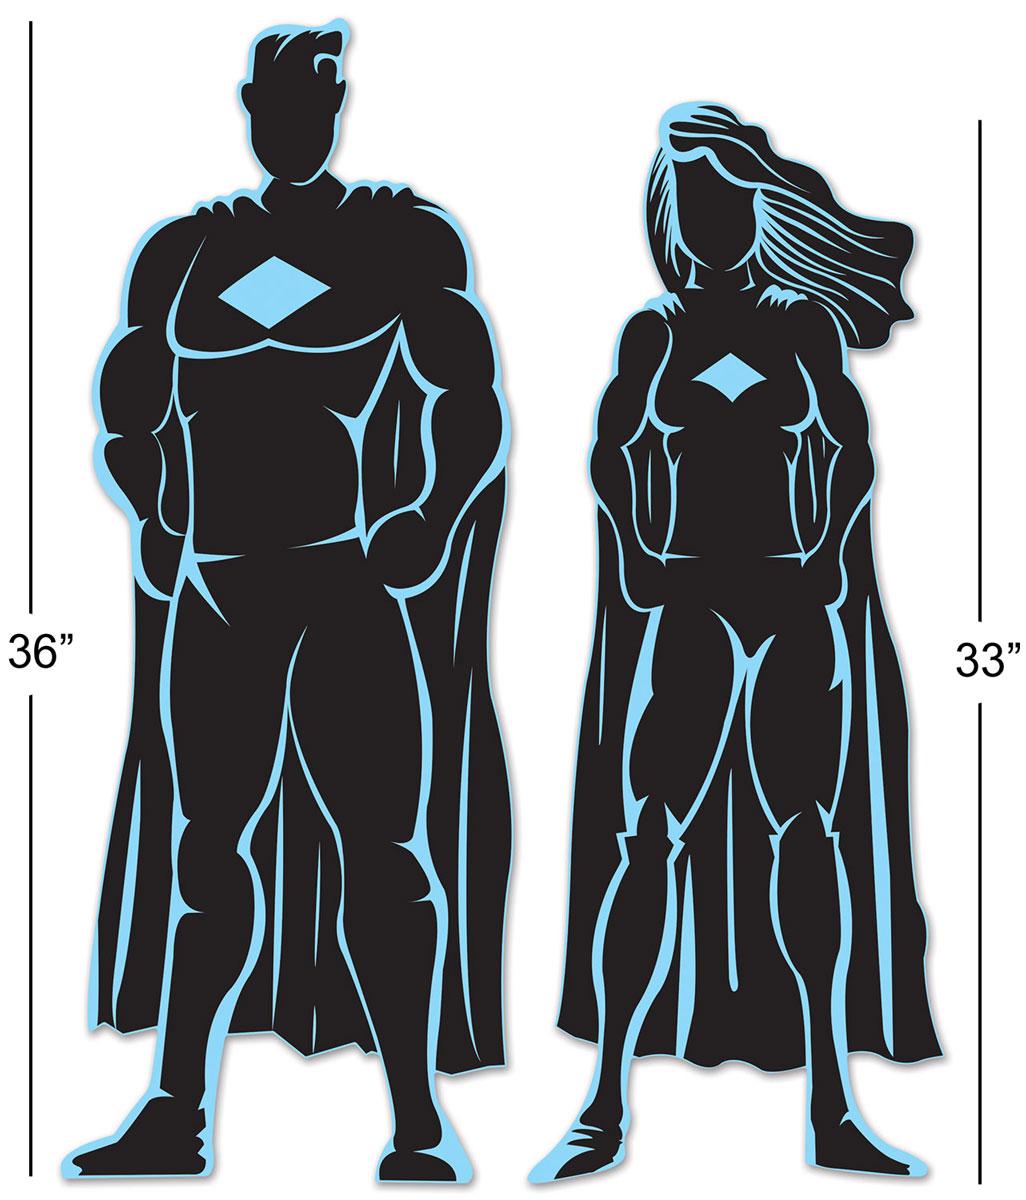 2pce Superhero Silhouette Cutouts pack by Beistle 59884 and available in the UK here at Karnival Costumes online party shop